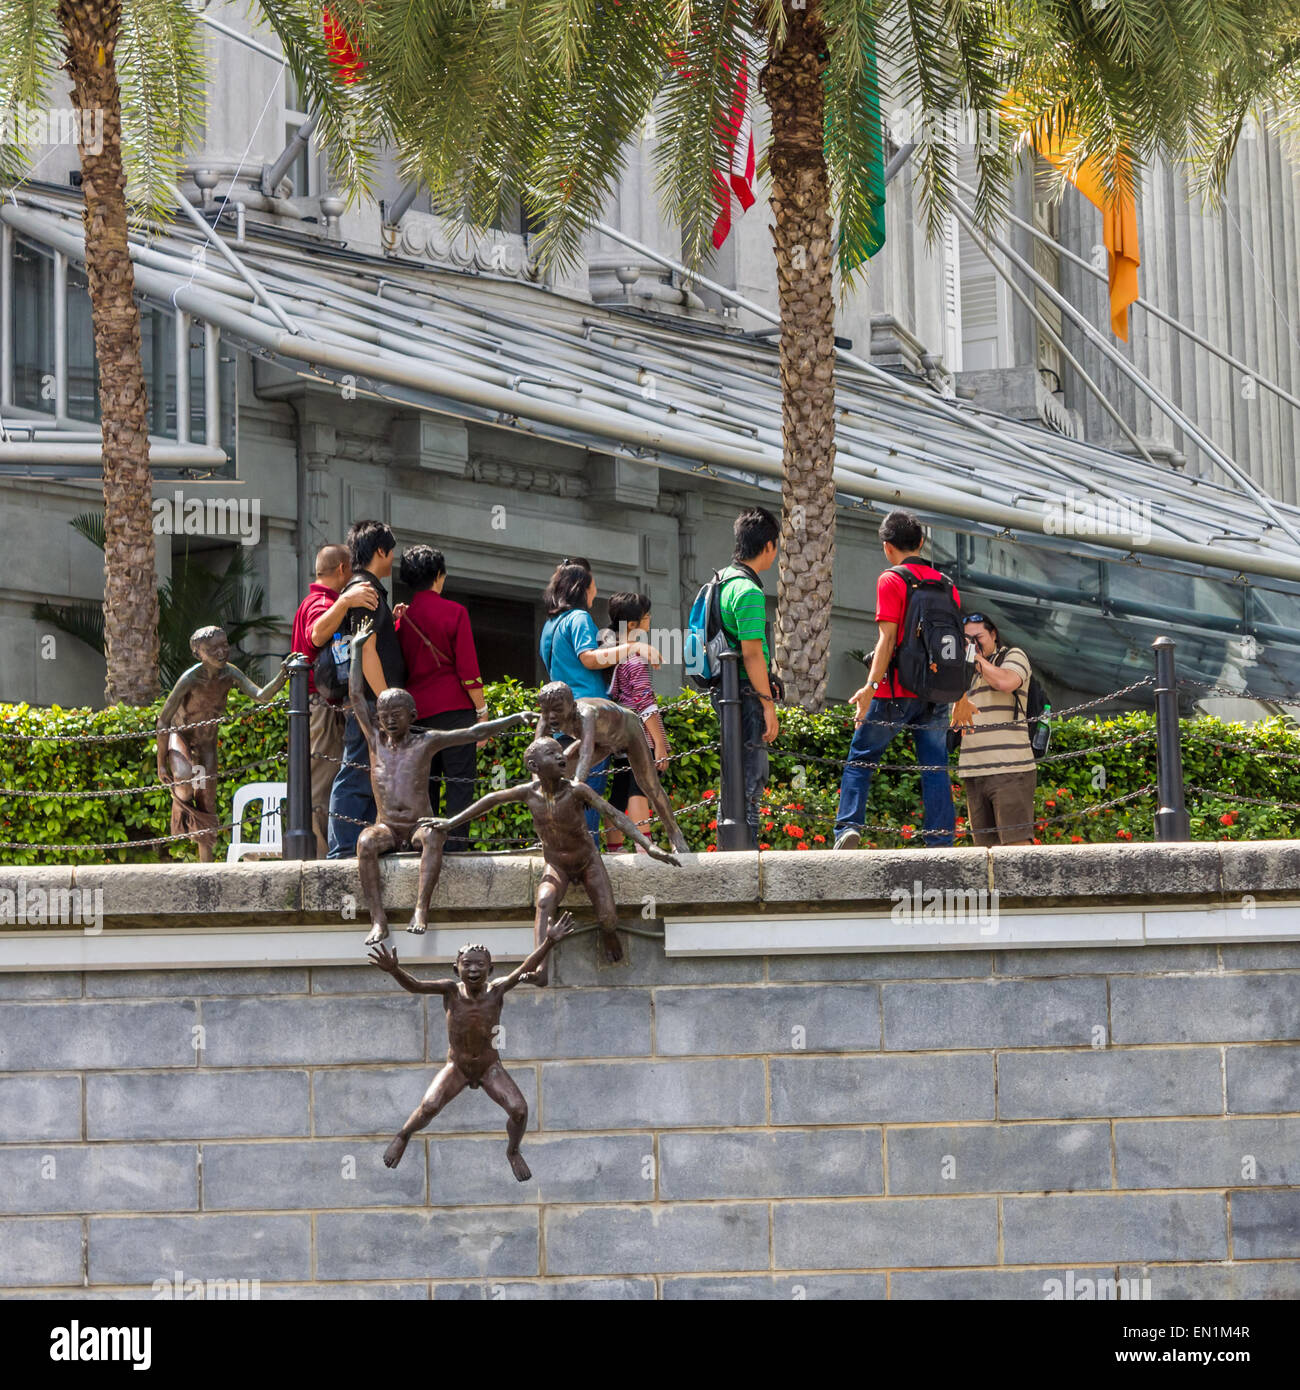 Sculpture, 'First Generation' by artist Chong Fah Cheong, depicts early life in Singapore. Stock Photo